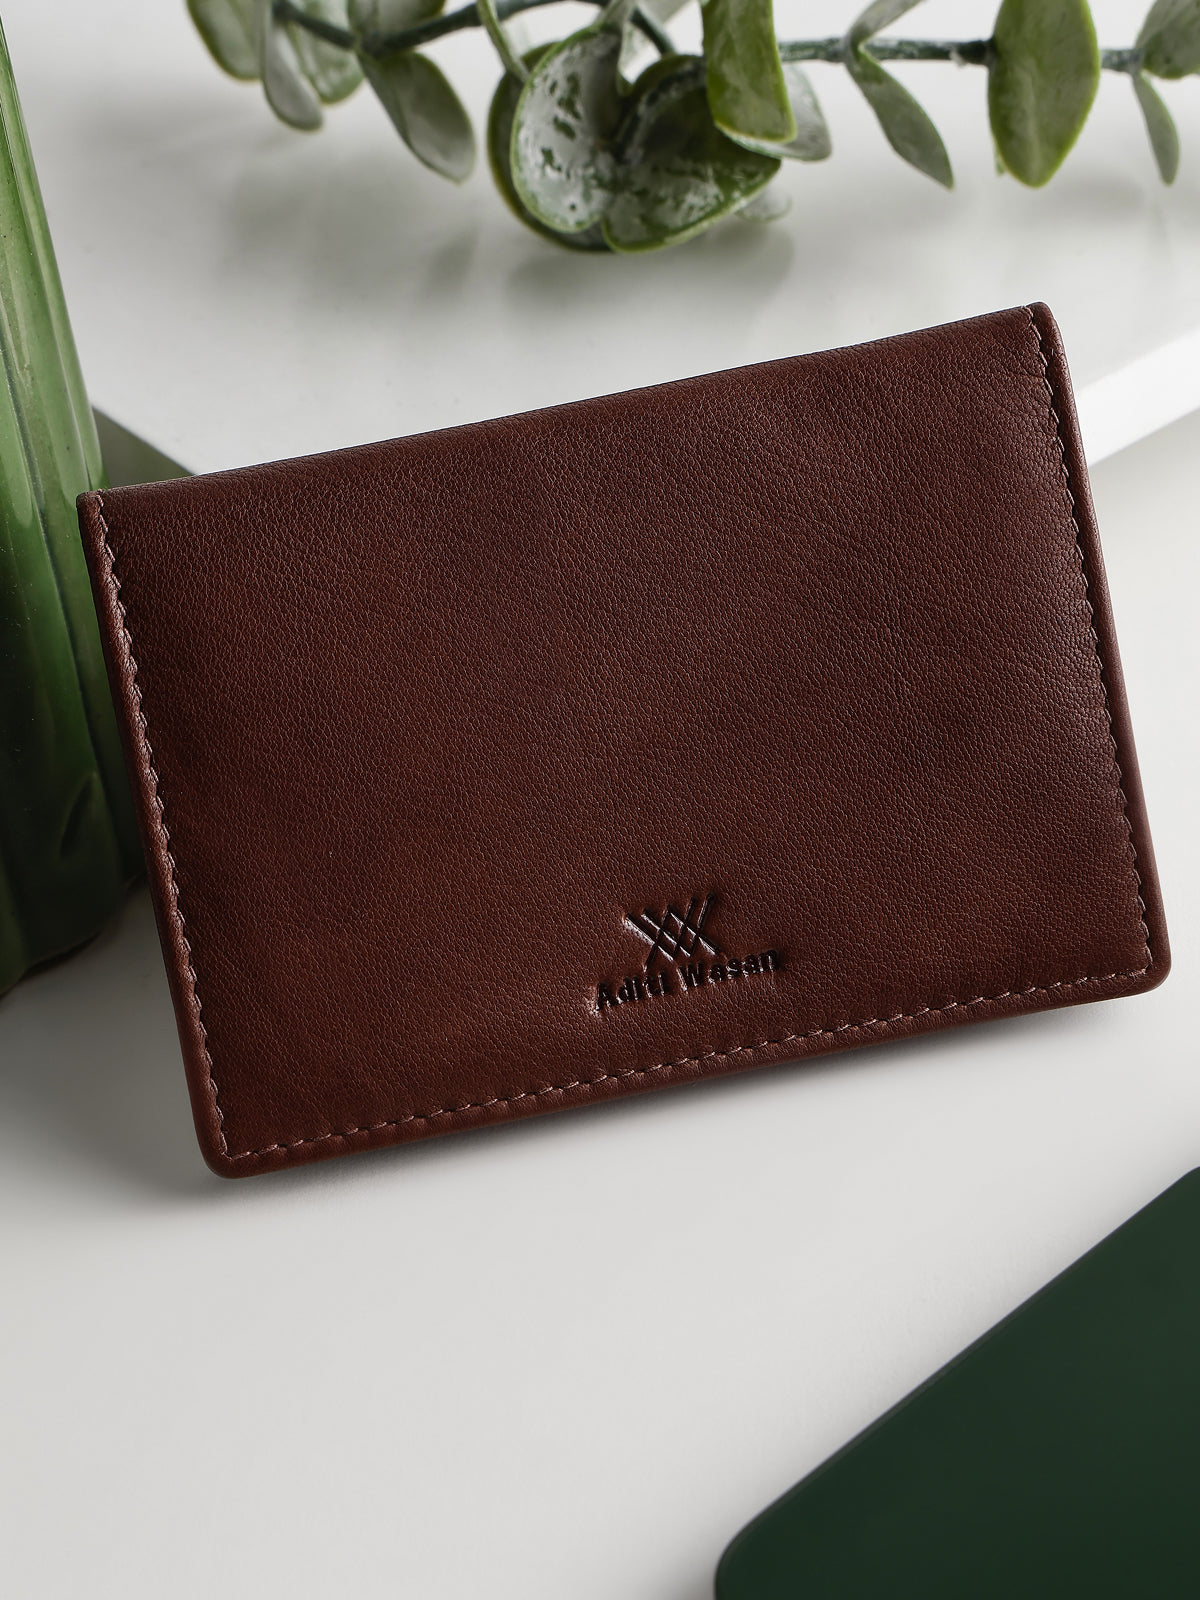 Genuine Leather Cardholder with Flab Button Closure Holds up to 15 Cards - Brown